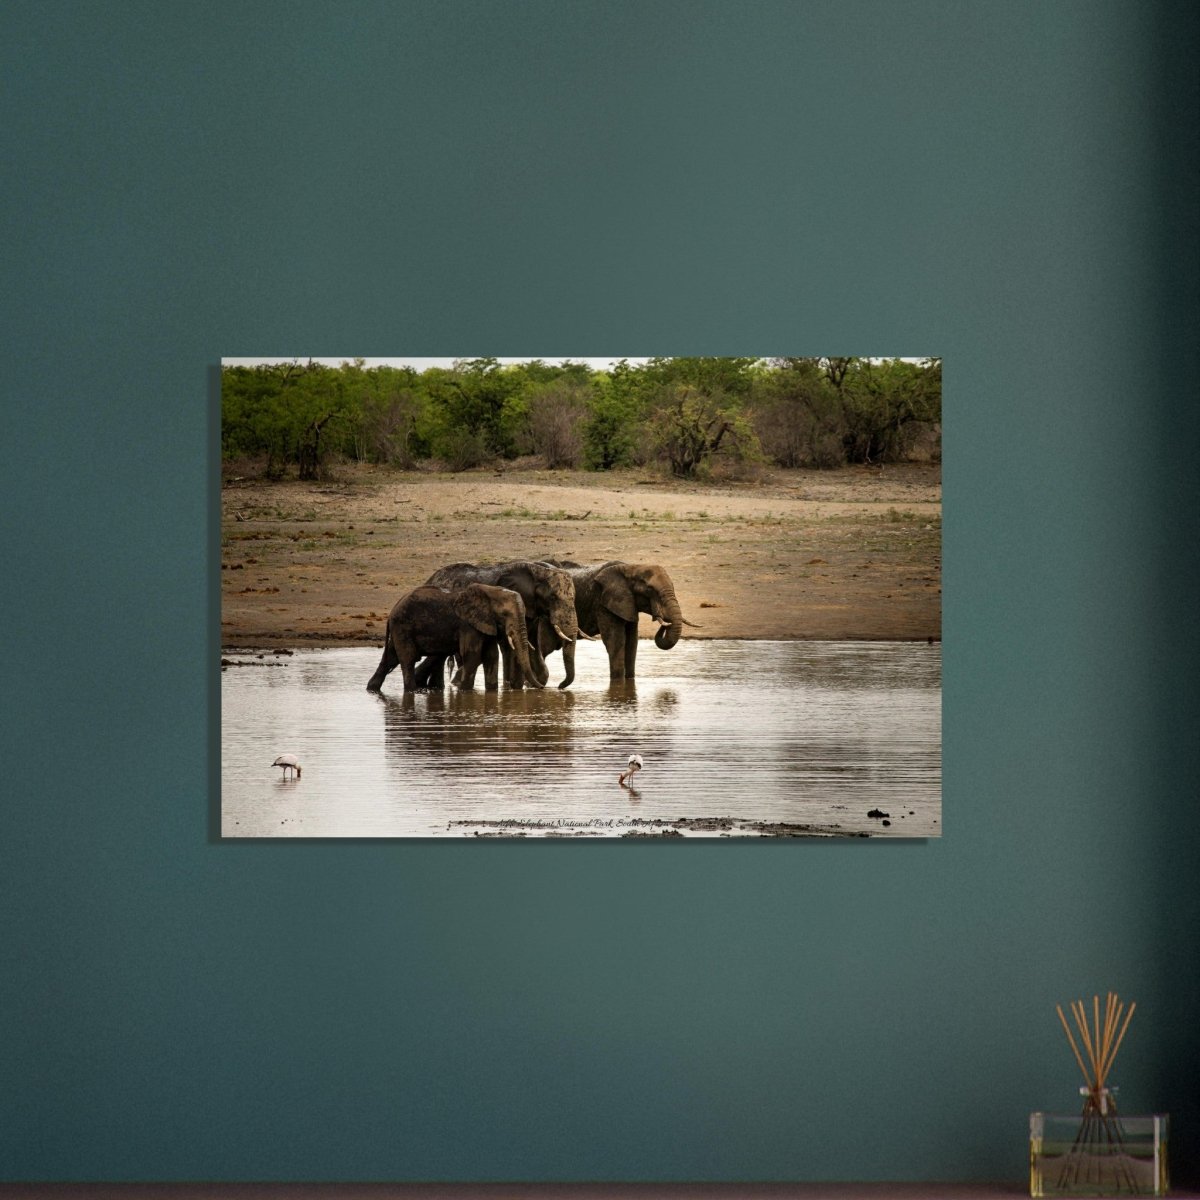 60x90 cm / 24x36″ Three Elephants in water by Picture This